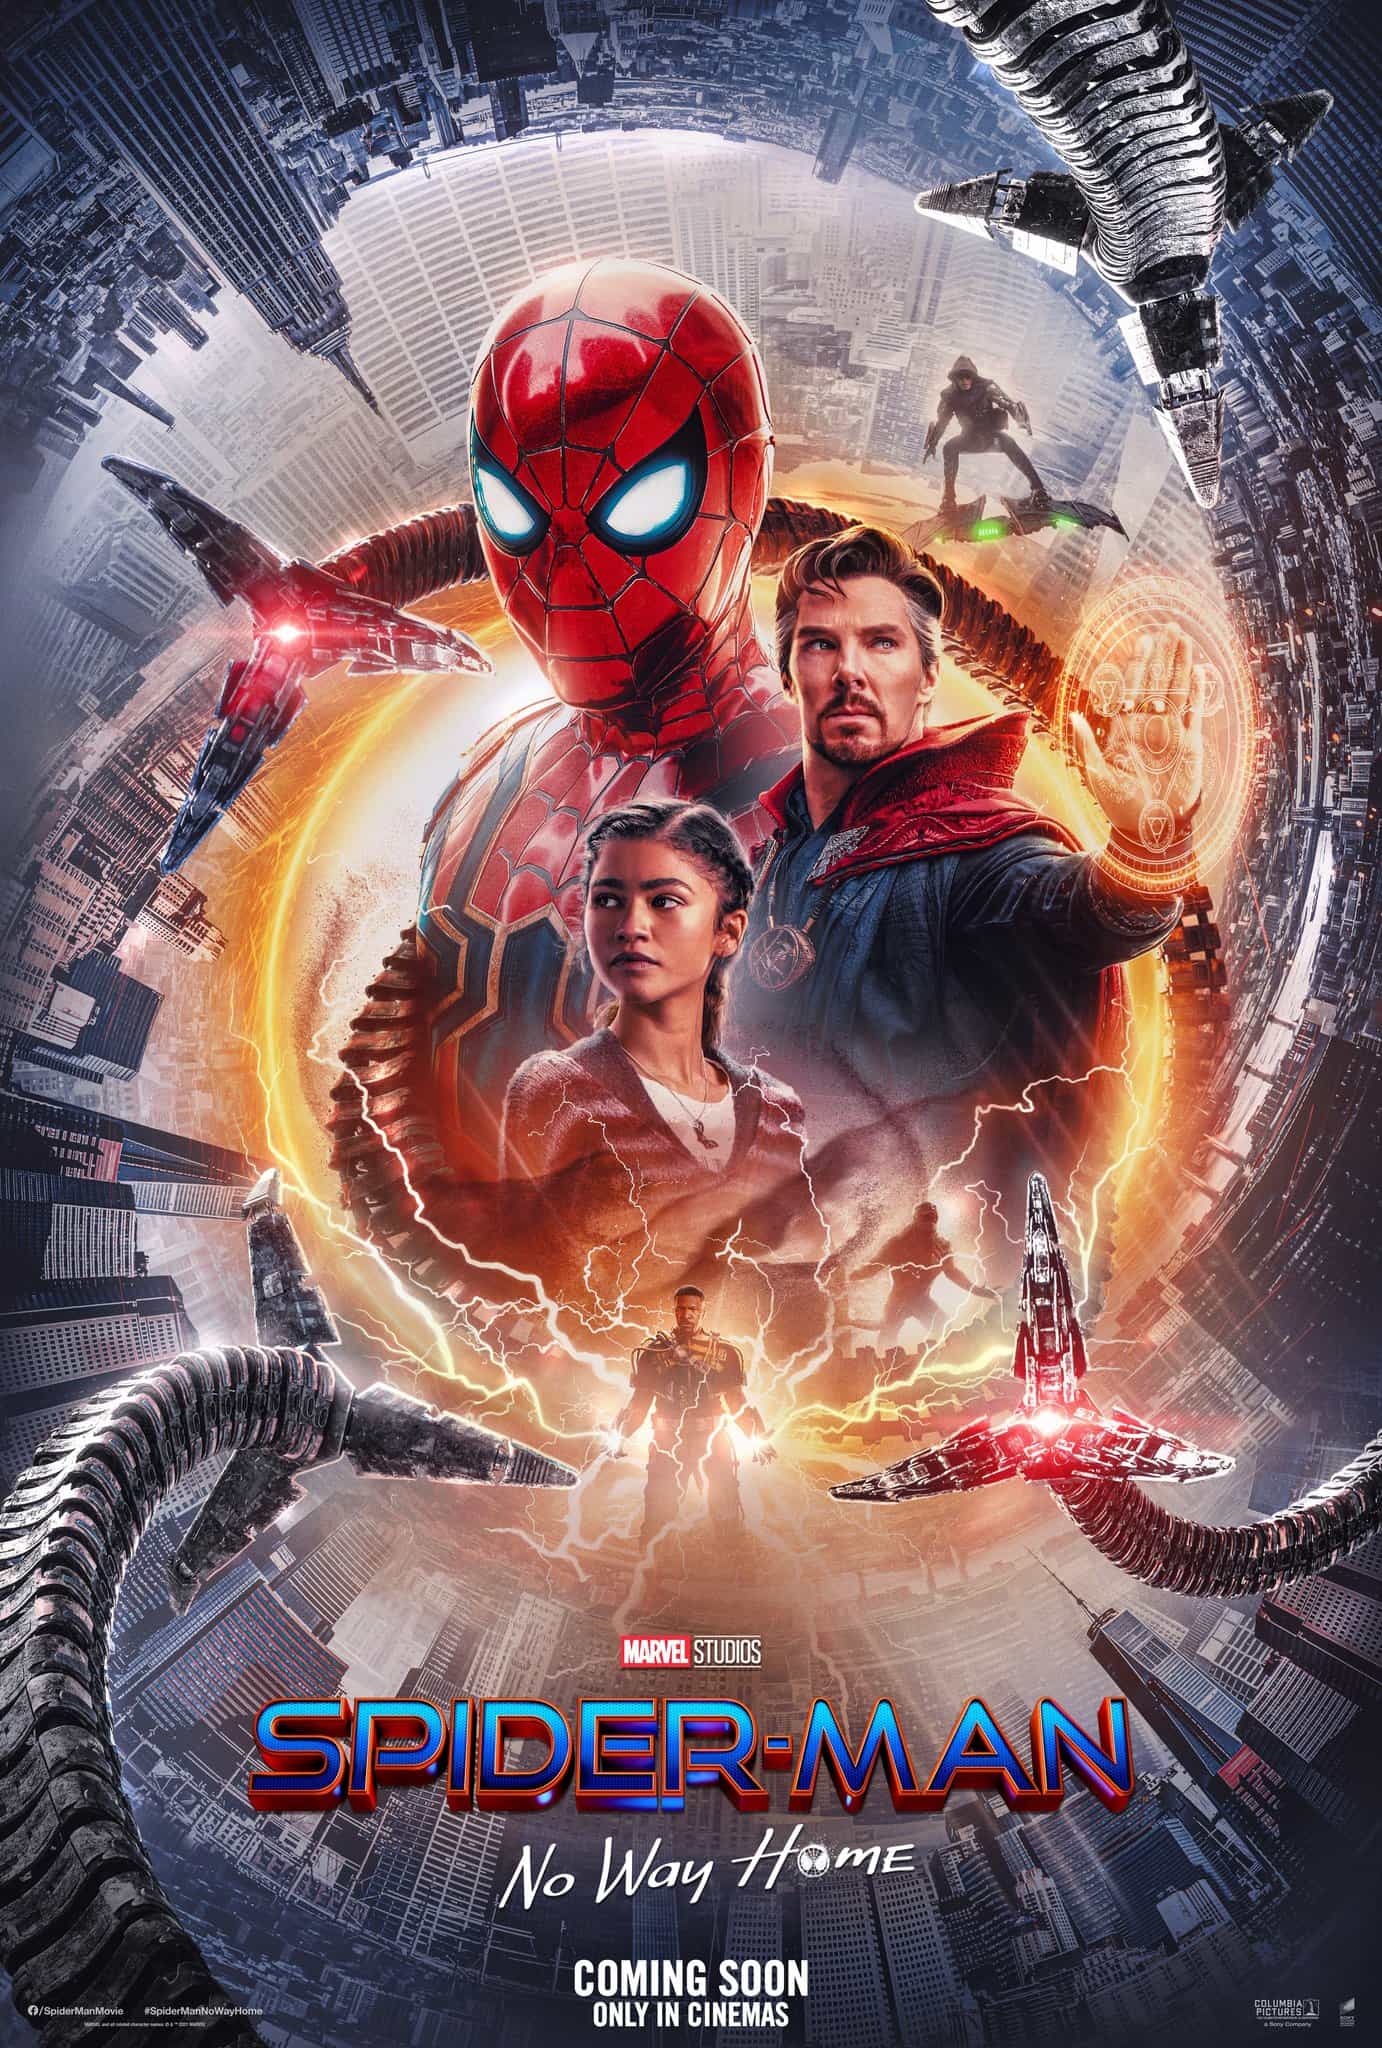 Spider-Man: No Way Home earns a massive 7.6 Million pound on opening day in the UK, beating the last Bond movie No Time To Die